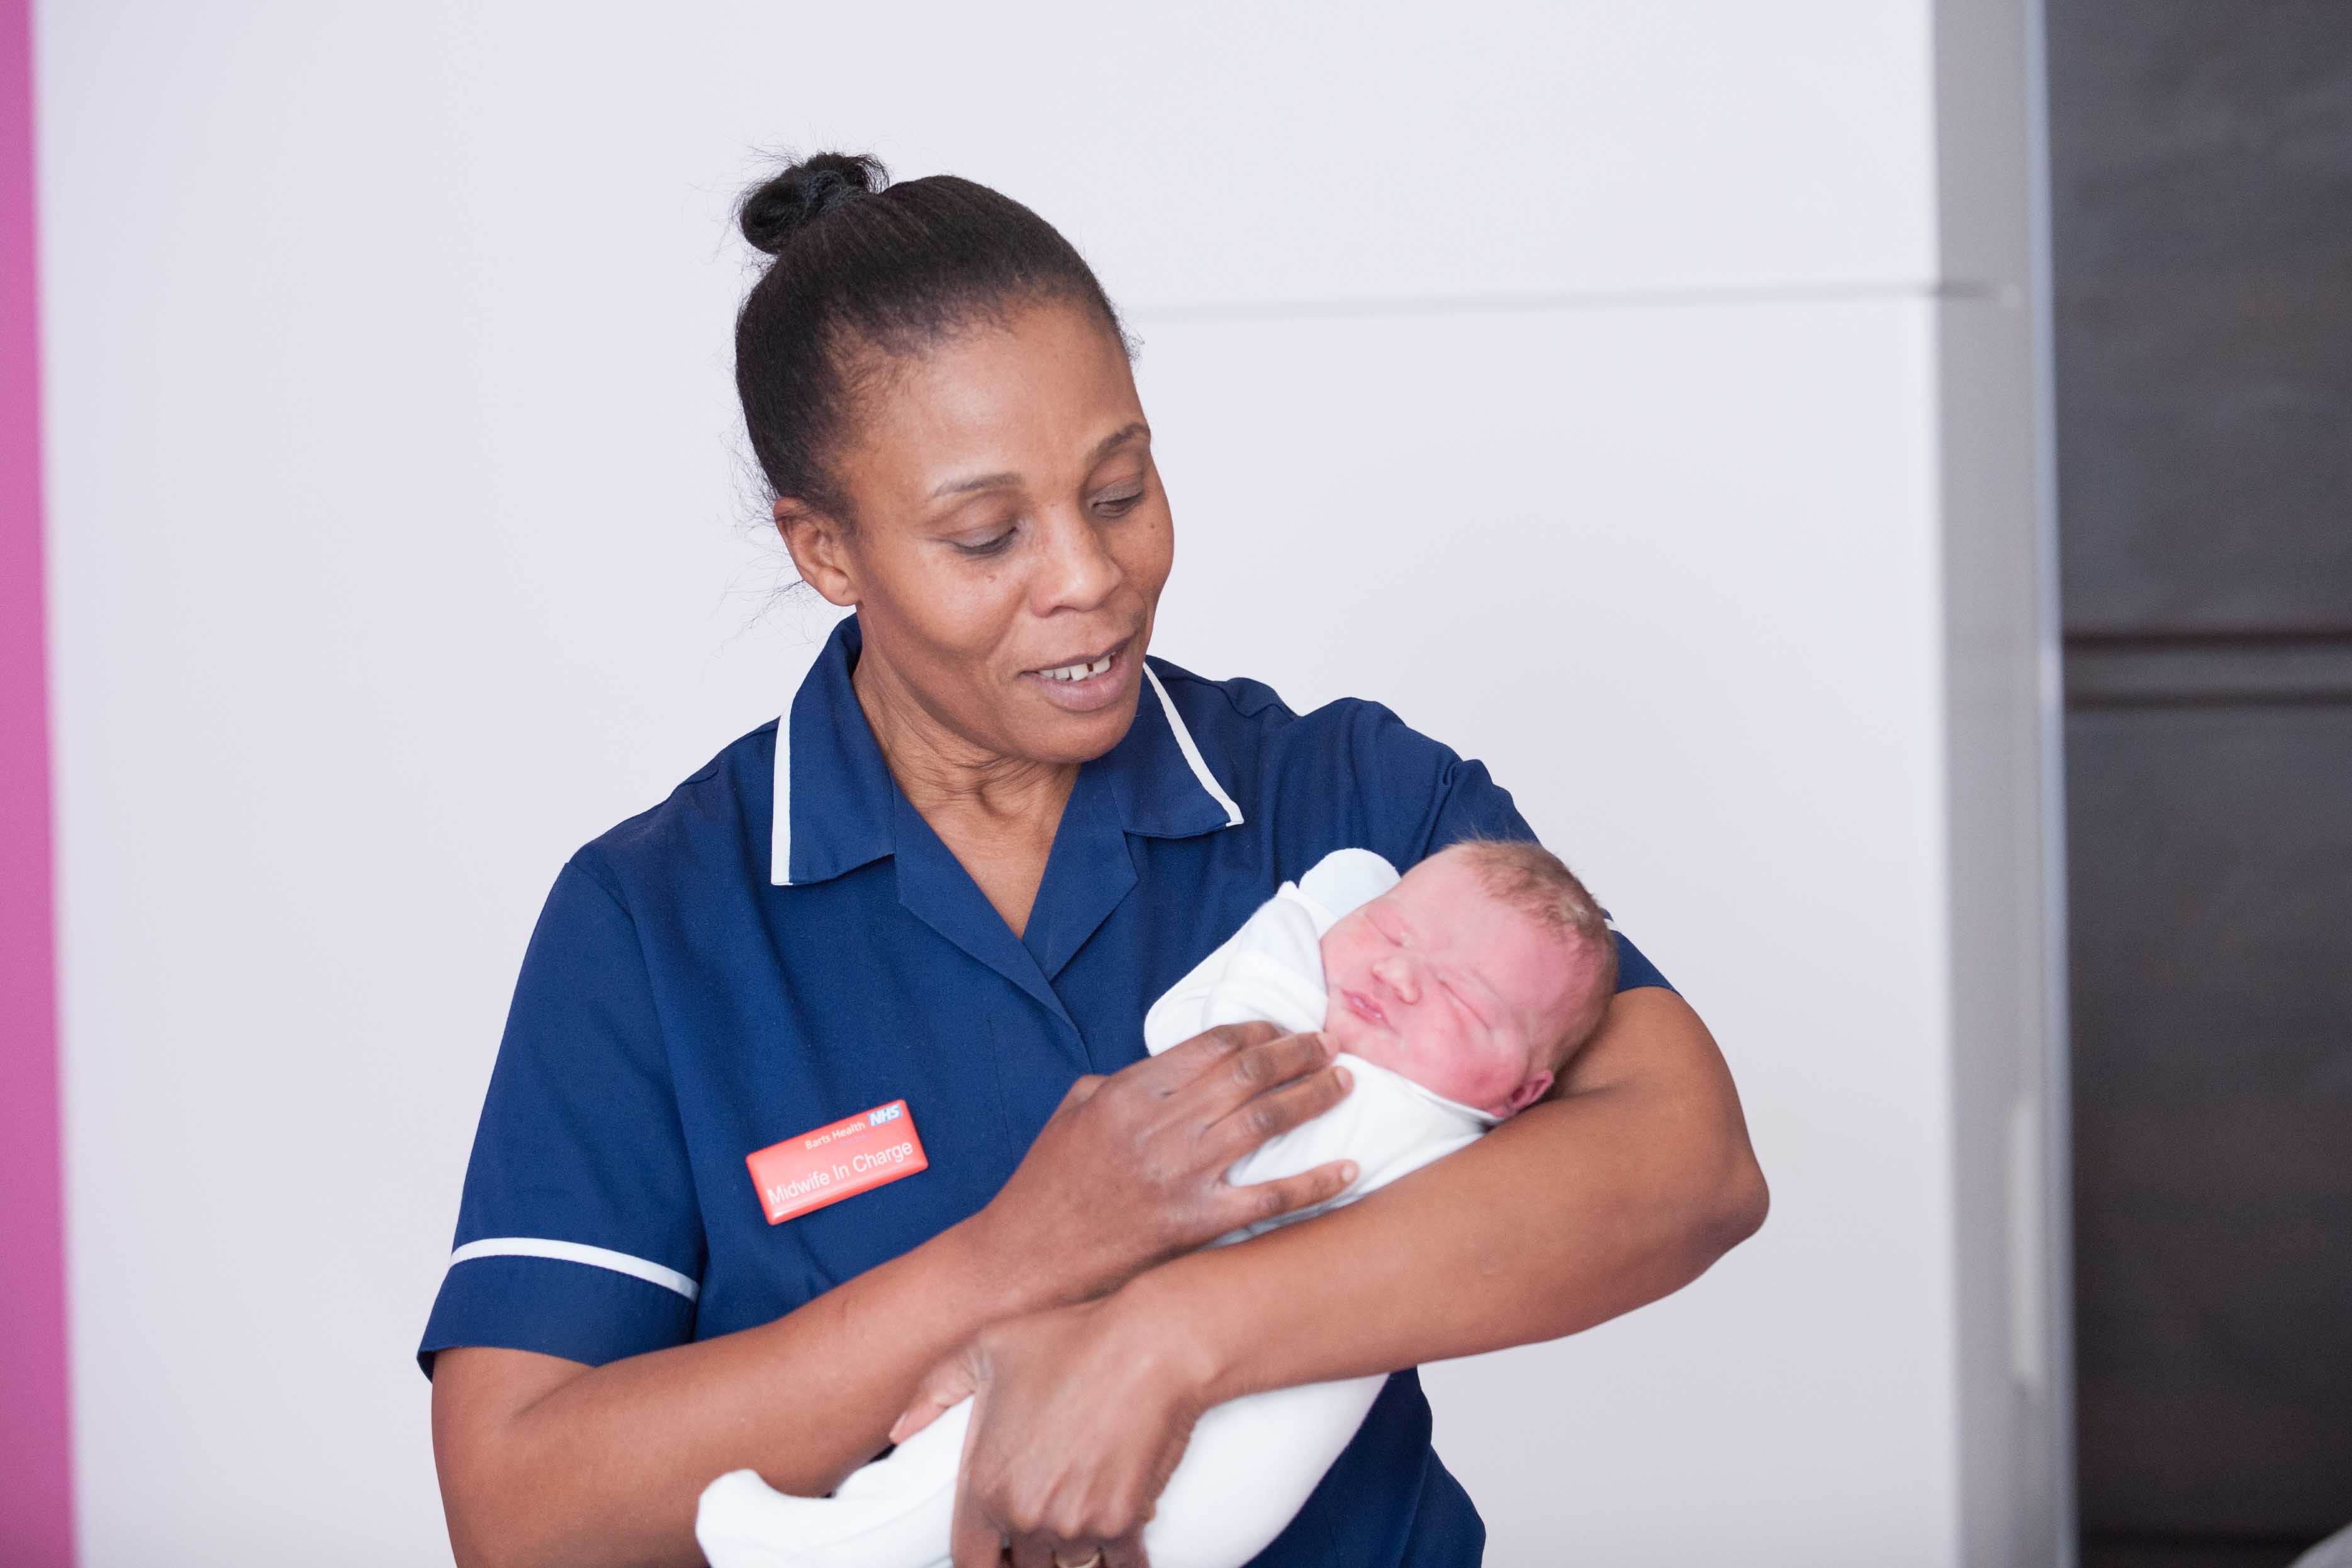 Having your baby at Barking Community Birth Centre